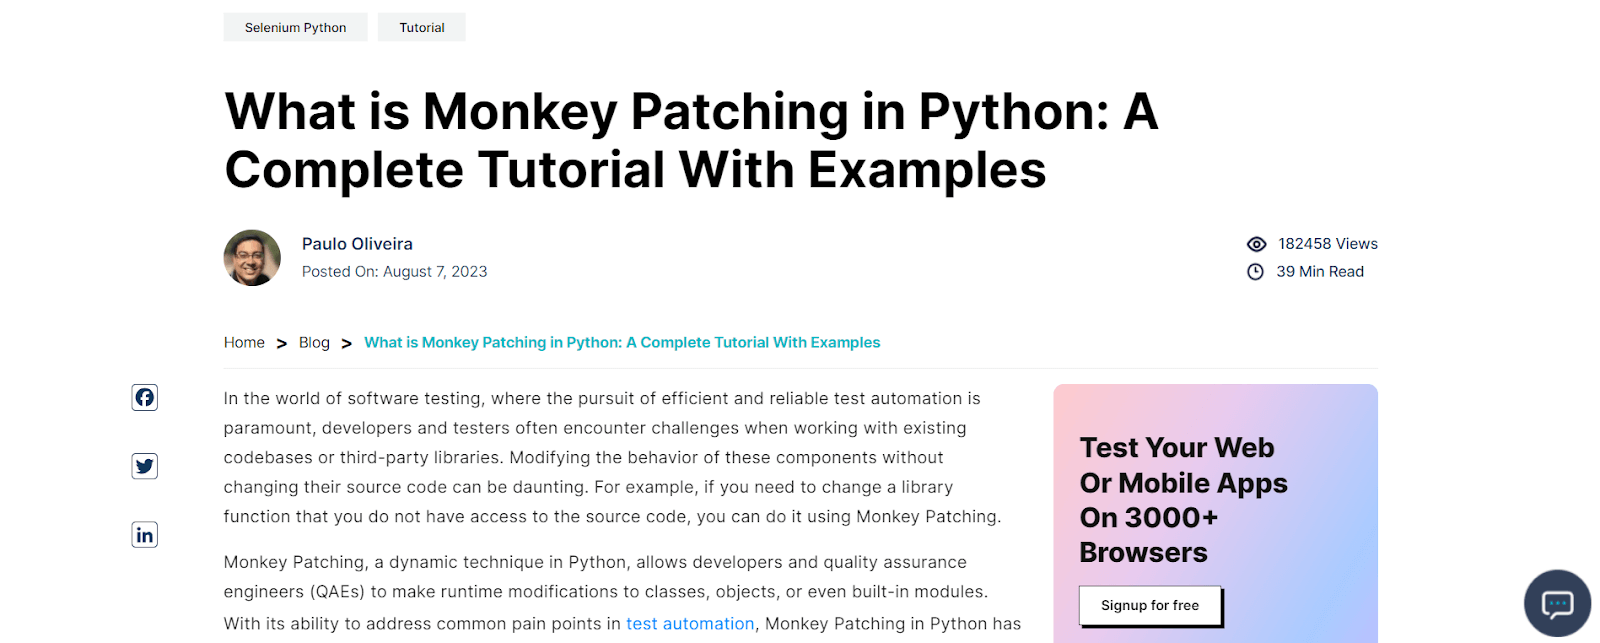 What Is Monkey Patching In Python